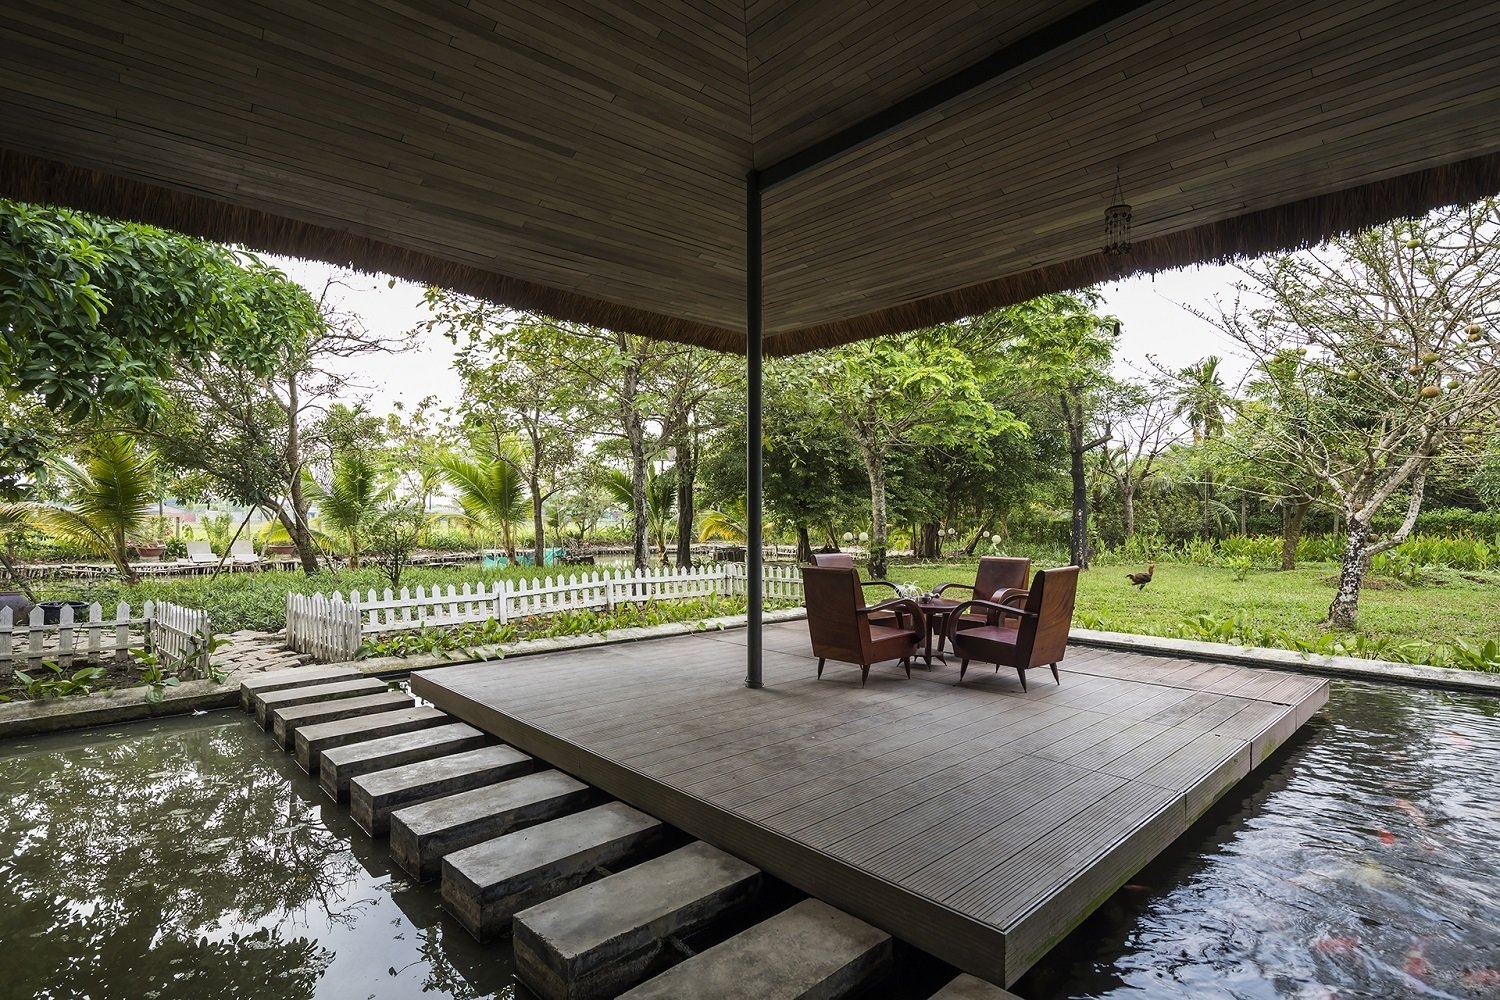 Floating villa in southern province named at American architecture awards